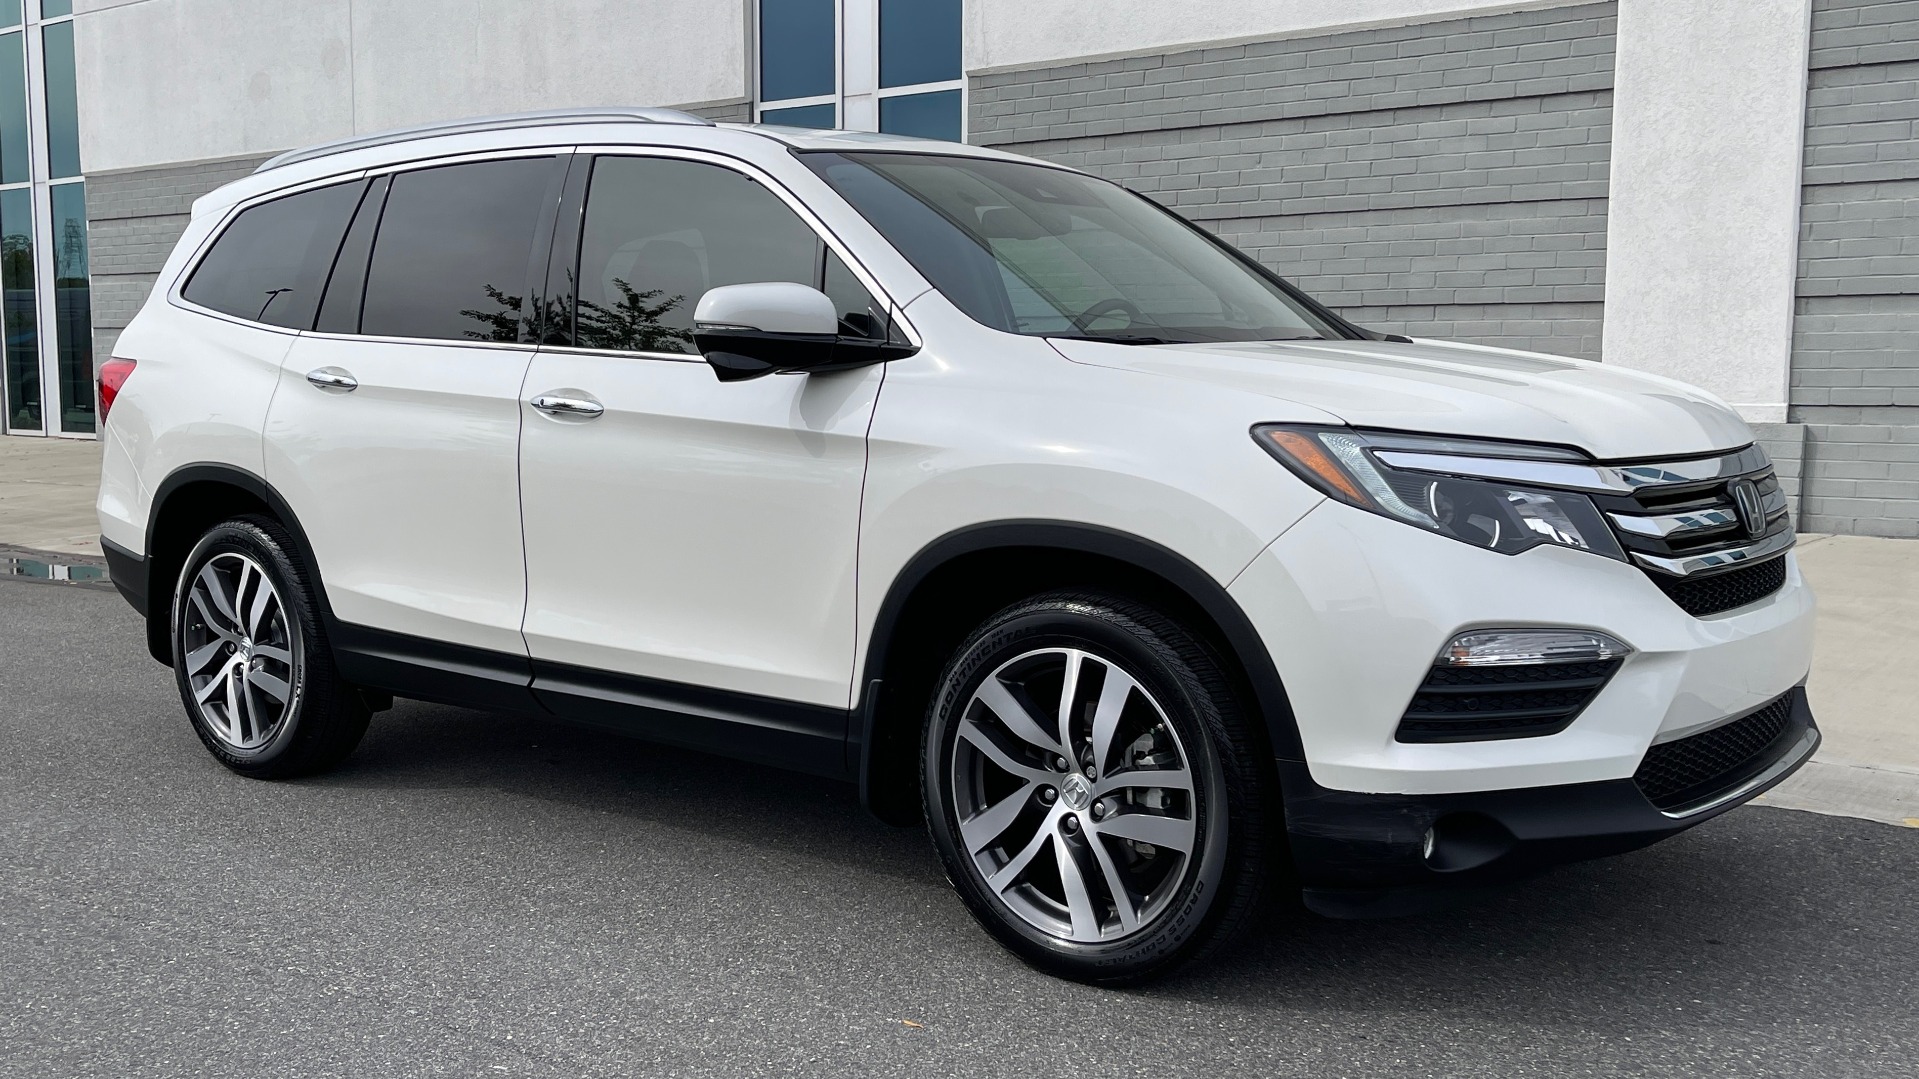 Used 2018 Honda PILOT TOURING AWD / 3.5L V6 / NAV / SUNROOF / 3-ROW / REARVIEW for sale Sold at Formula Imports in Charlotte NC 28227 5